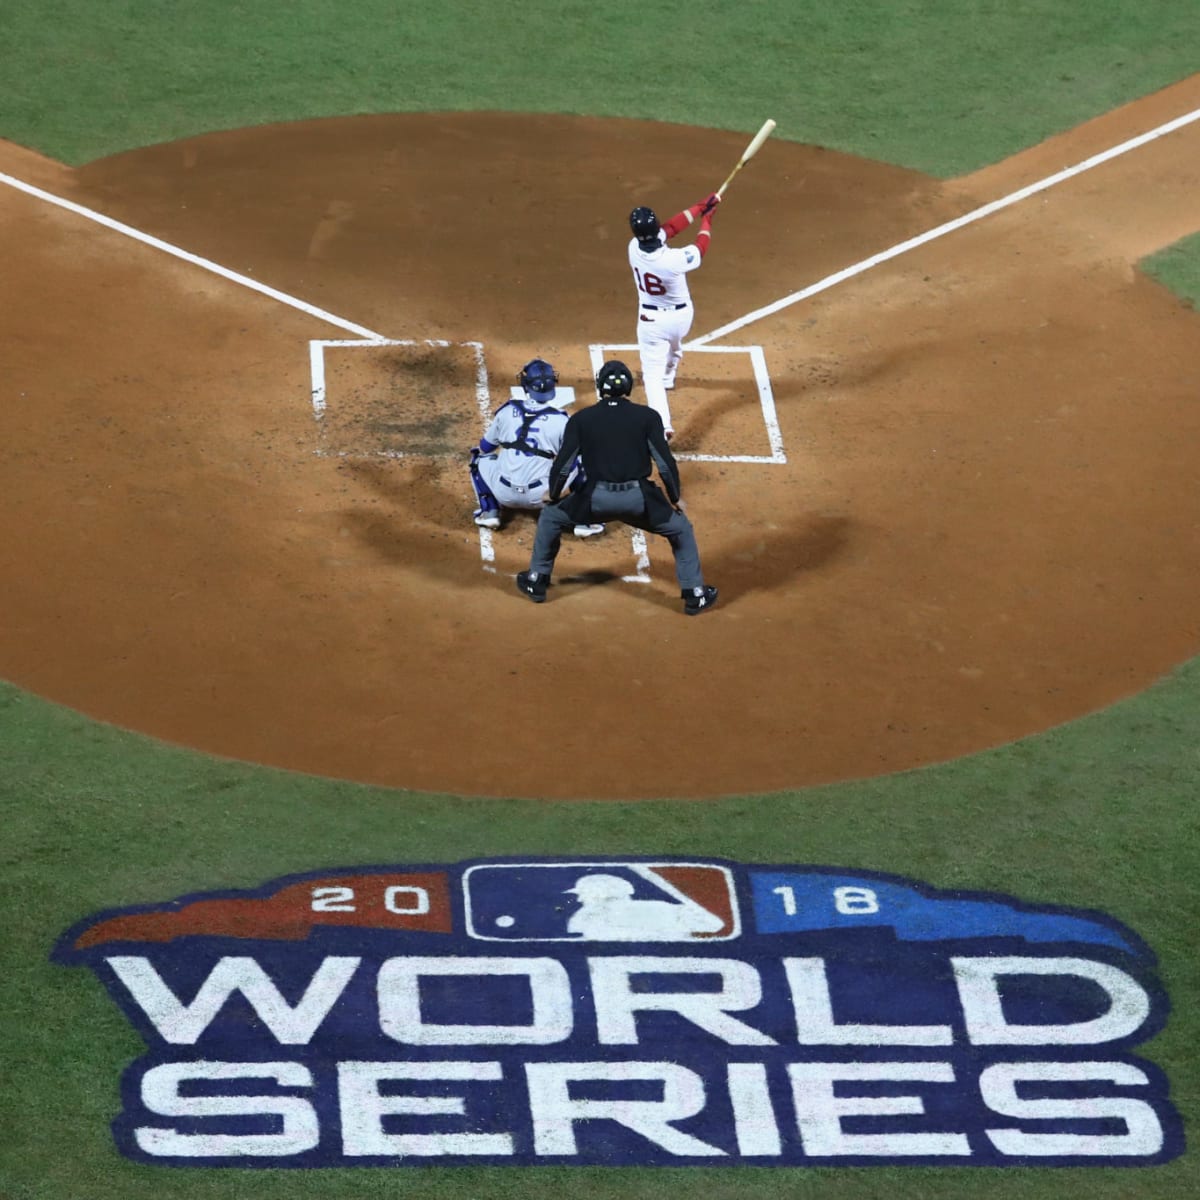 This Photo Of Kobe Bryant At The World Series Is Going Viral